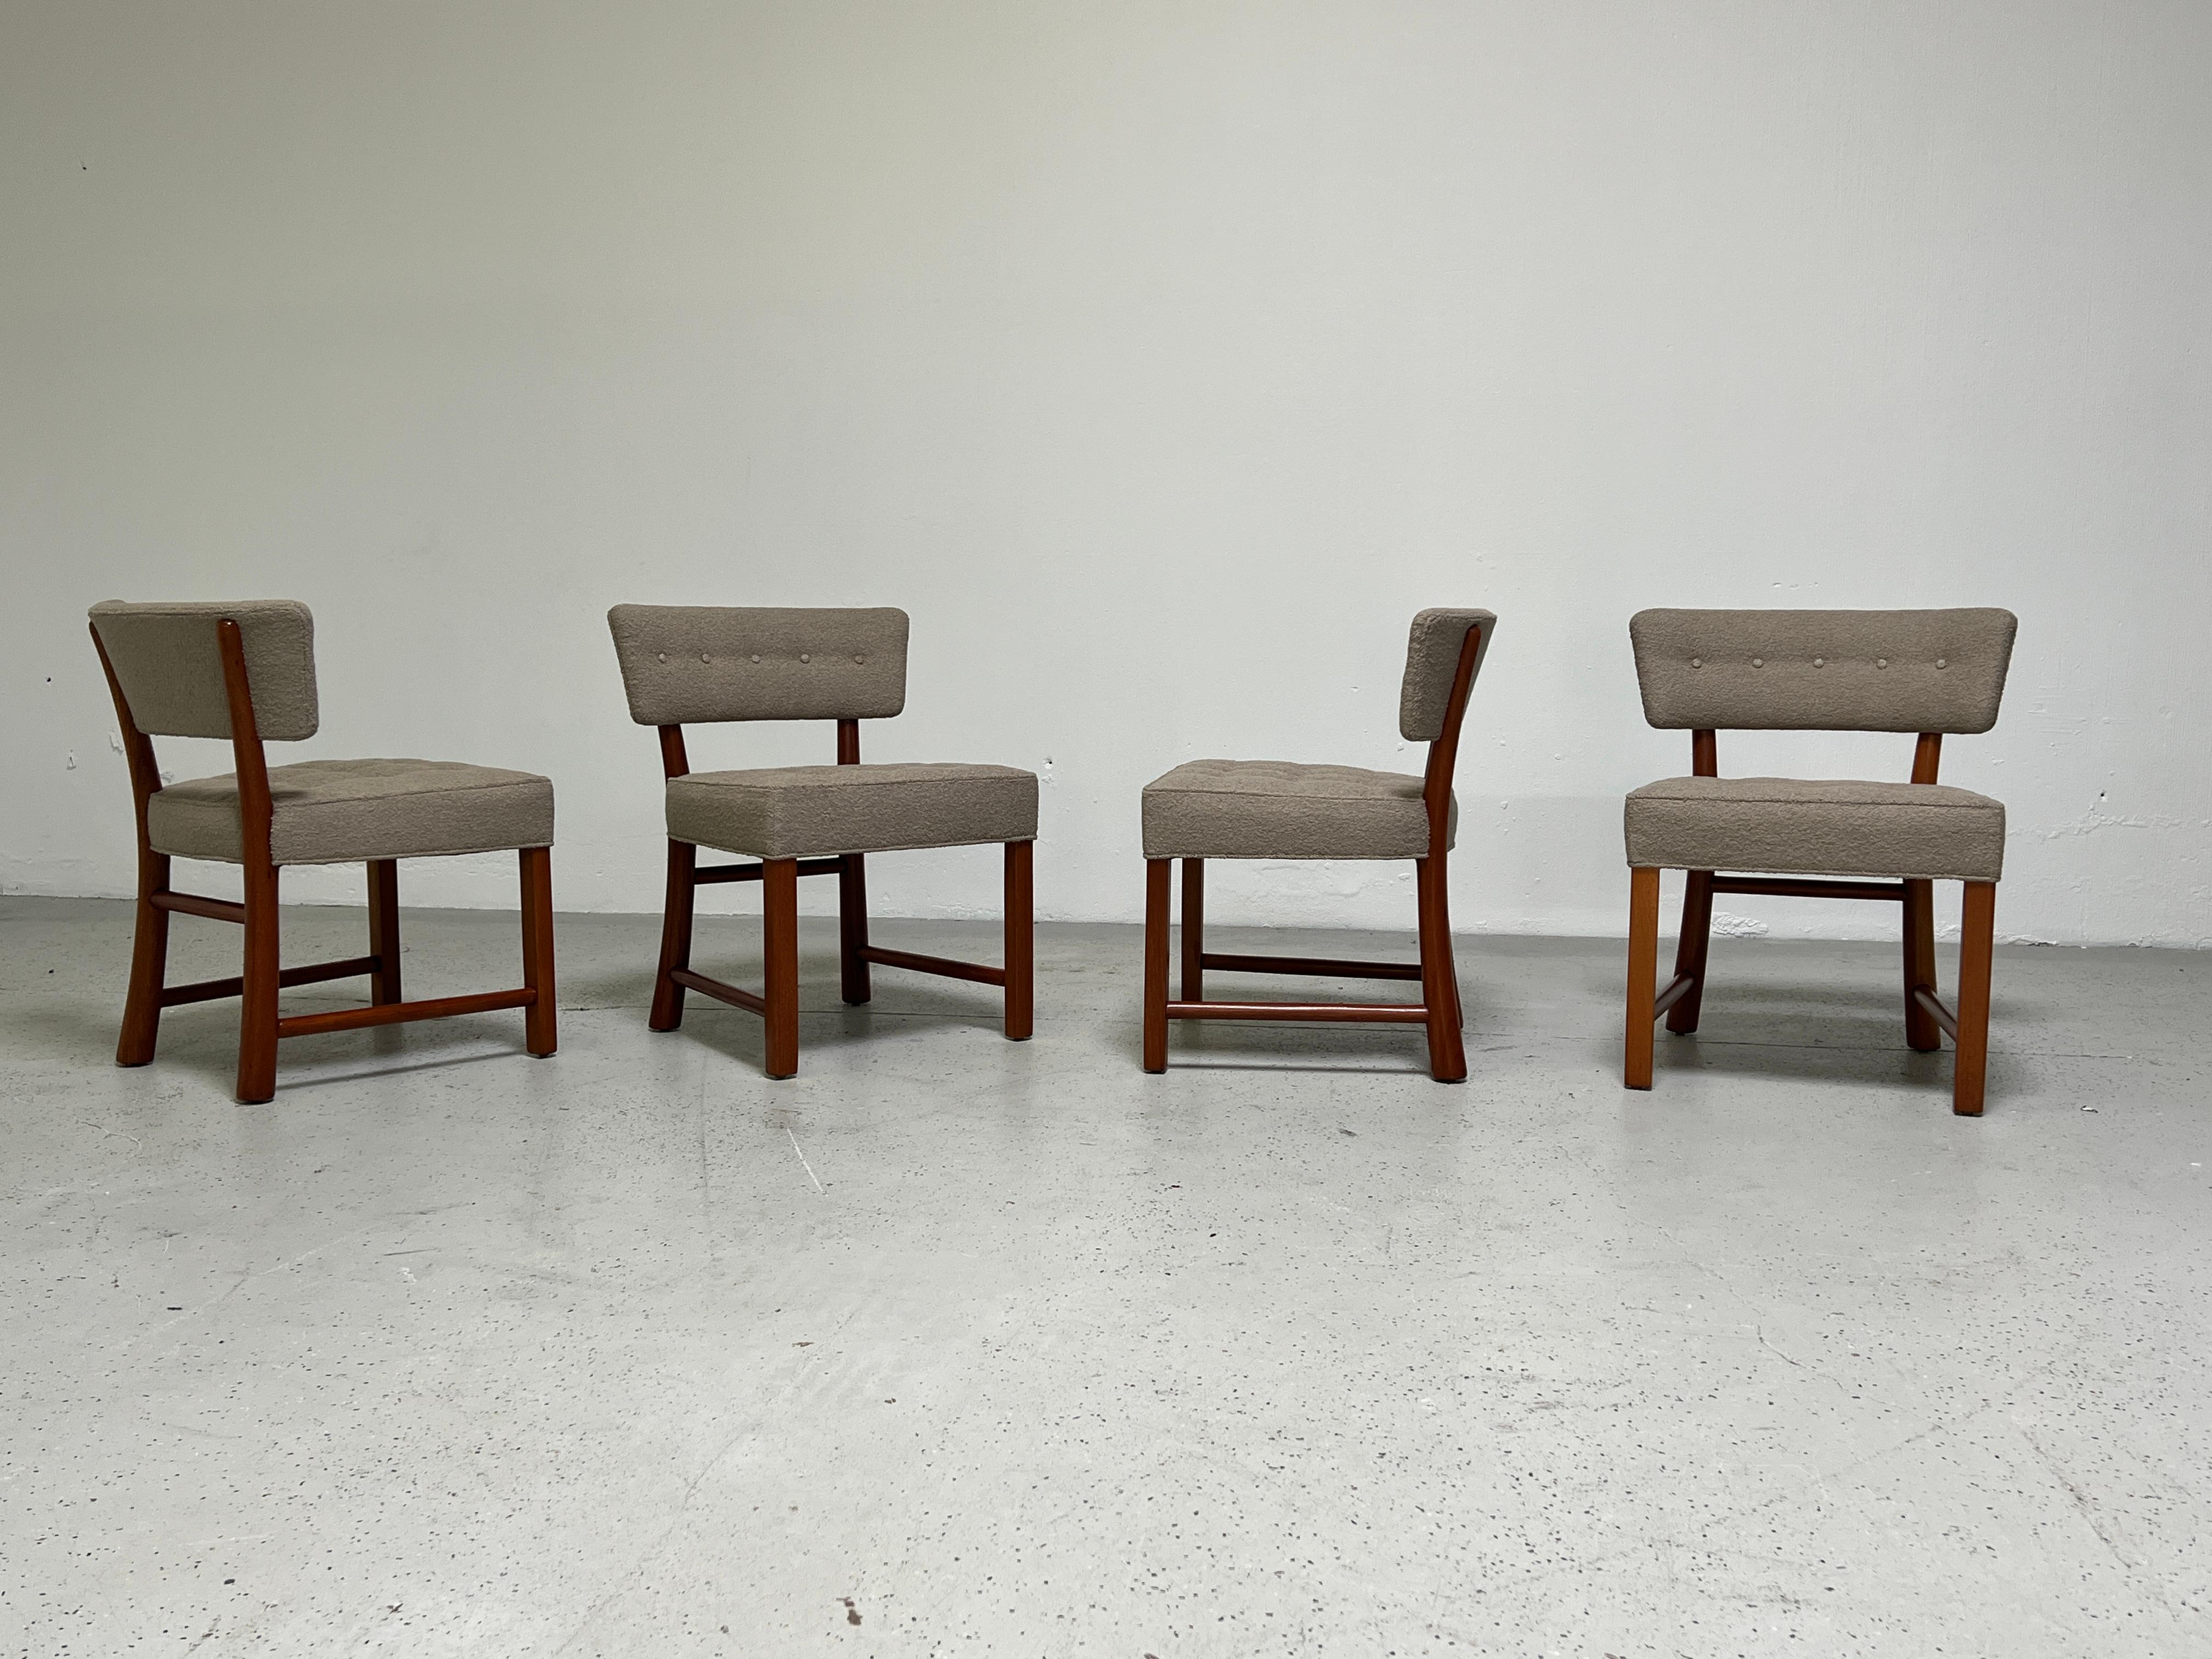 A set of four curved back dining chairs with mahogany frames. Designed by Edward Wormley for Dunbar.